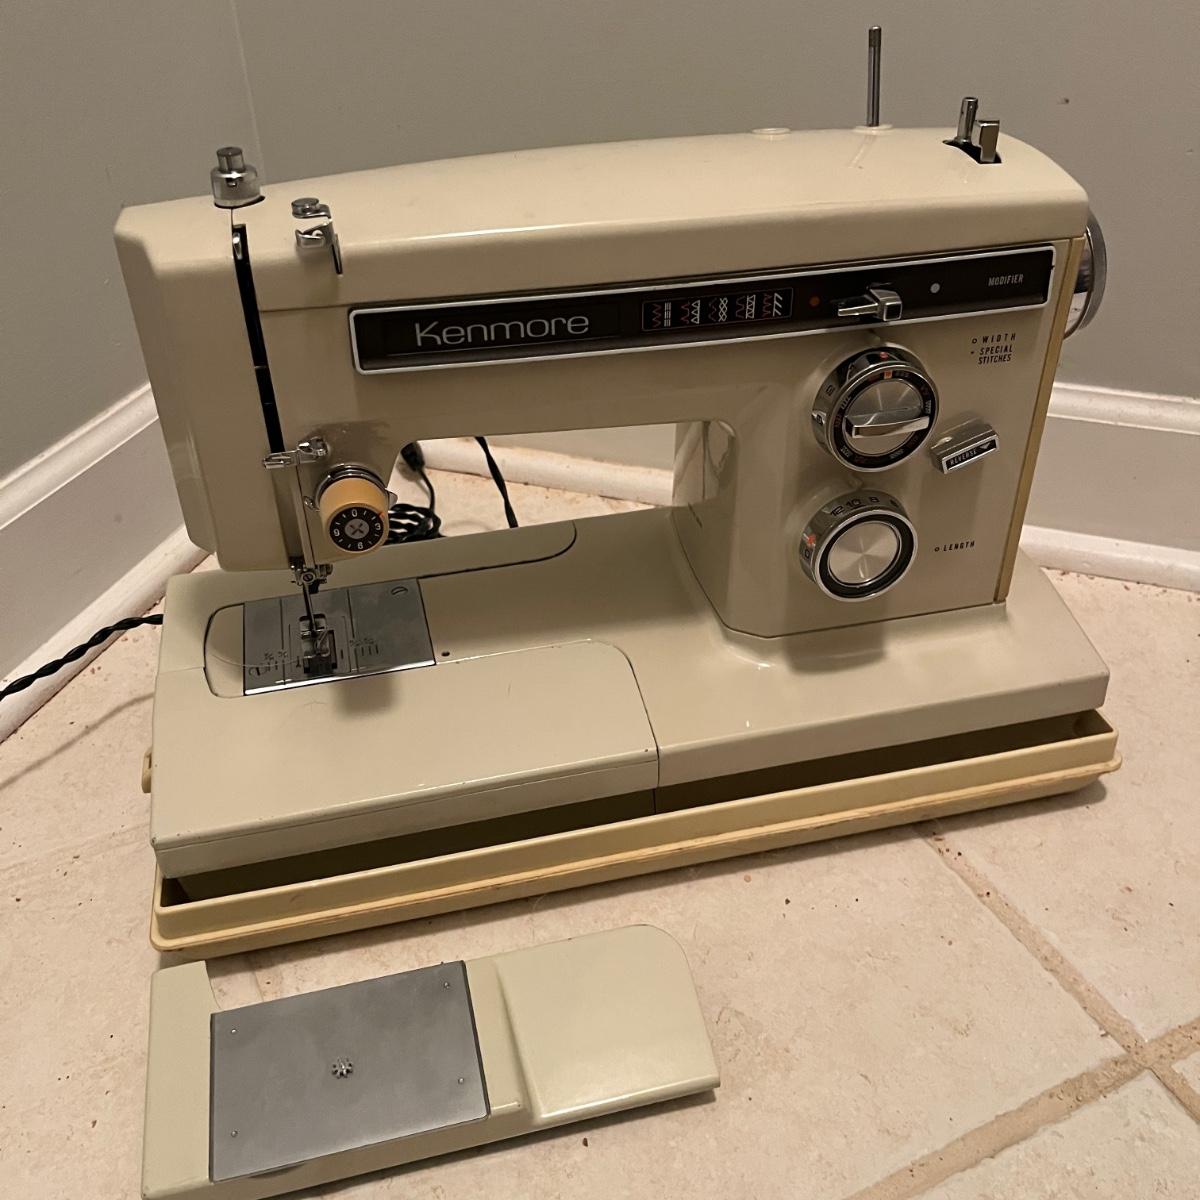 Sold at Auction: VTG Sears Kenmore Sewing Machine